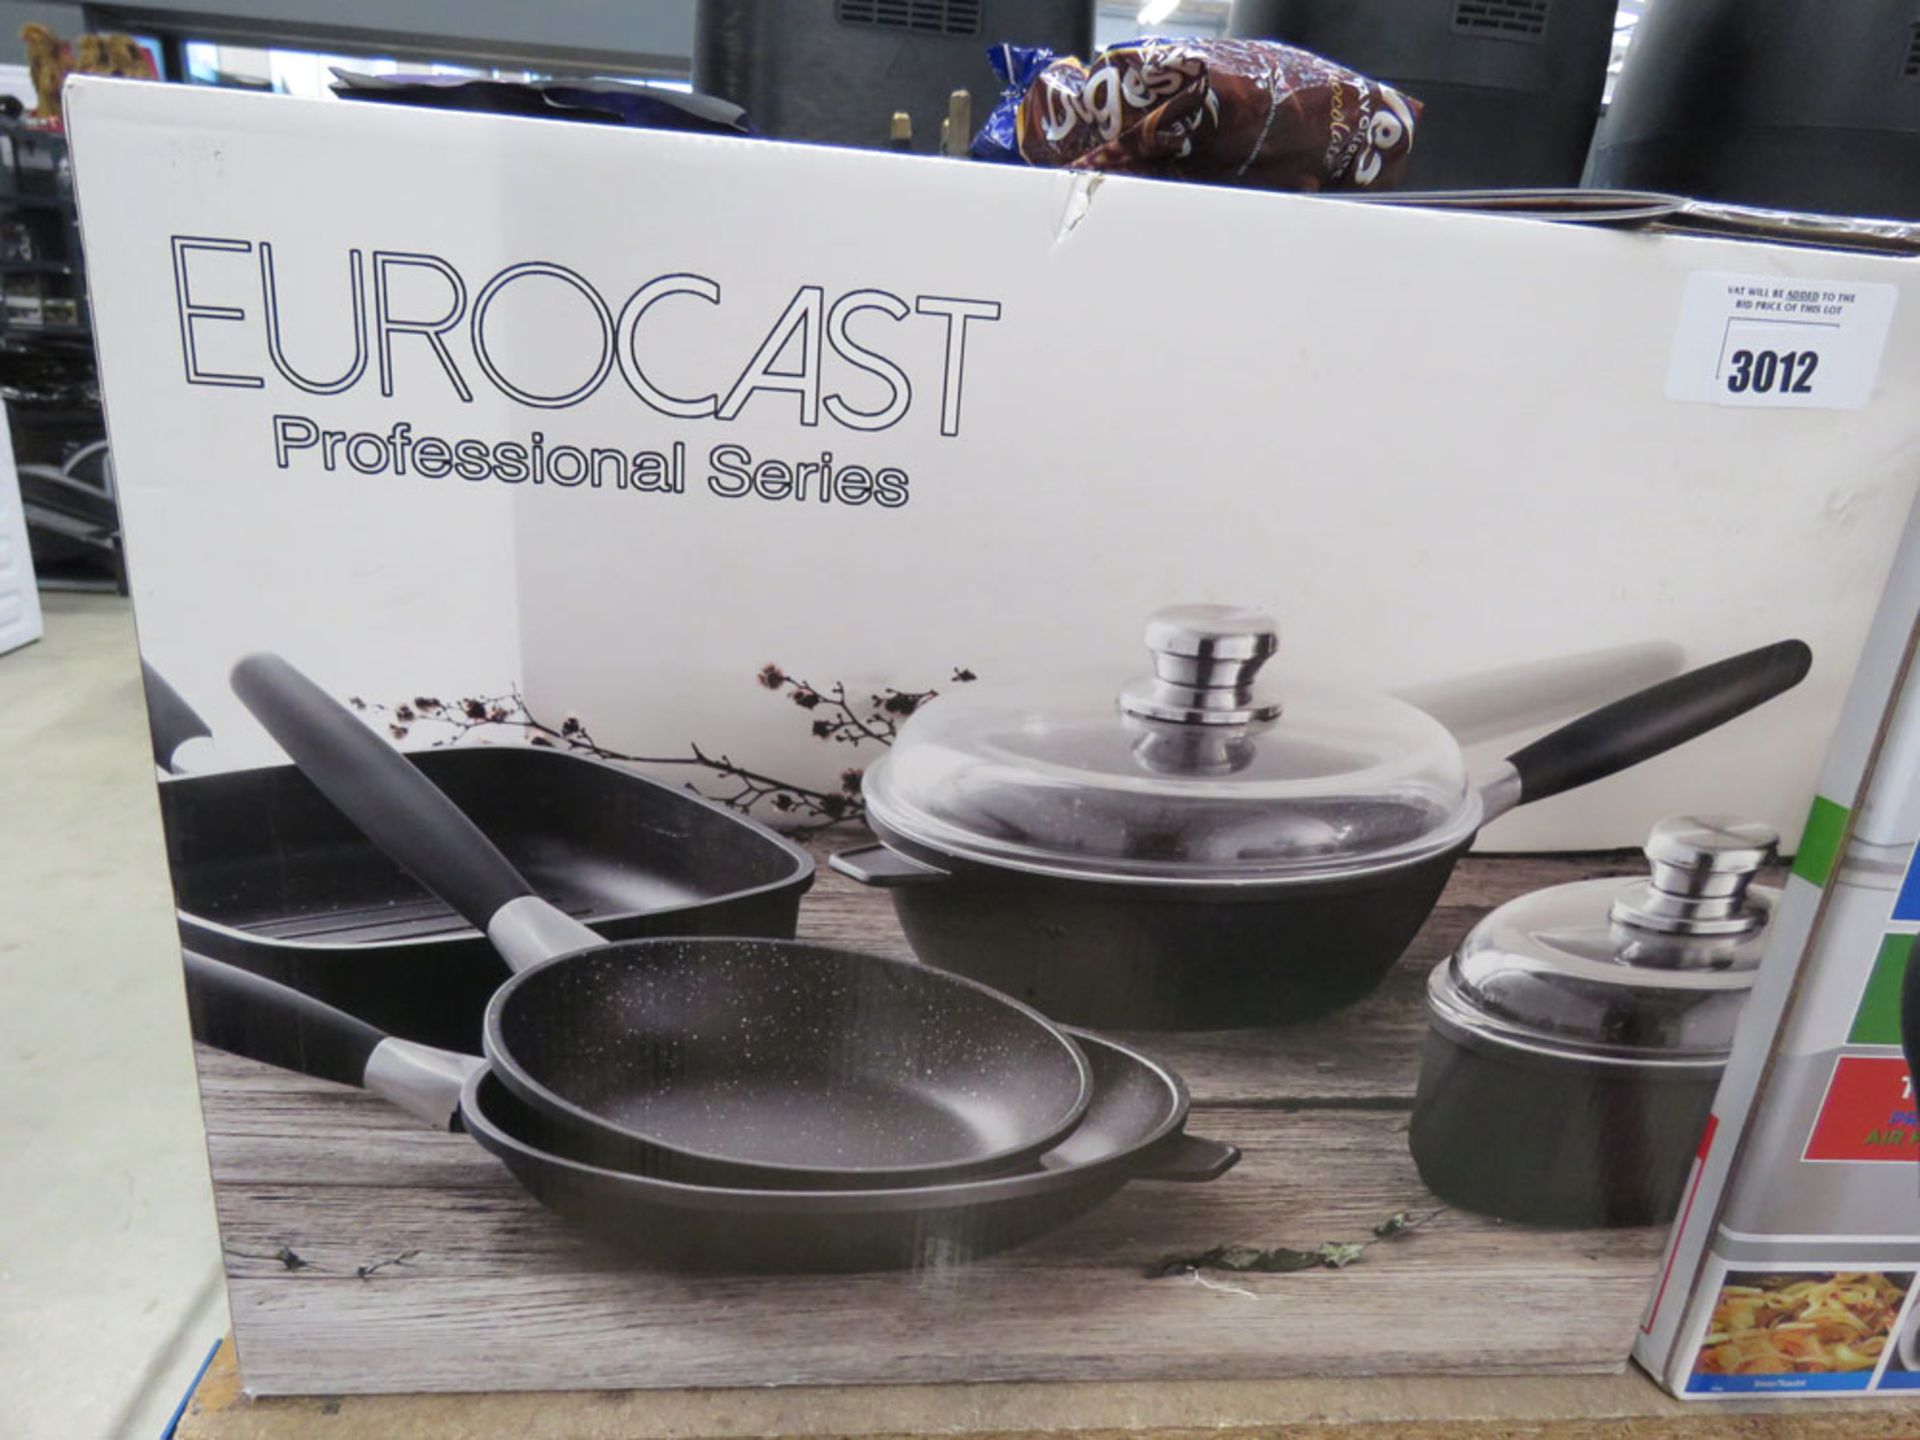 Eurocast professional series cookware set with box